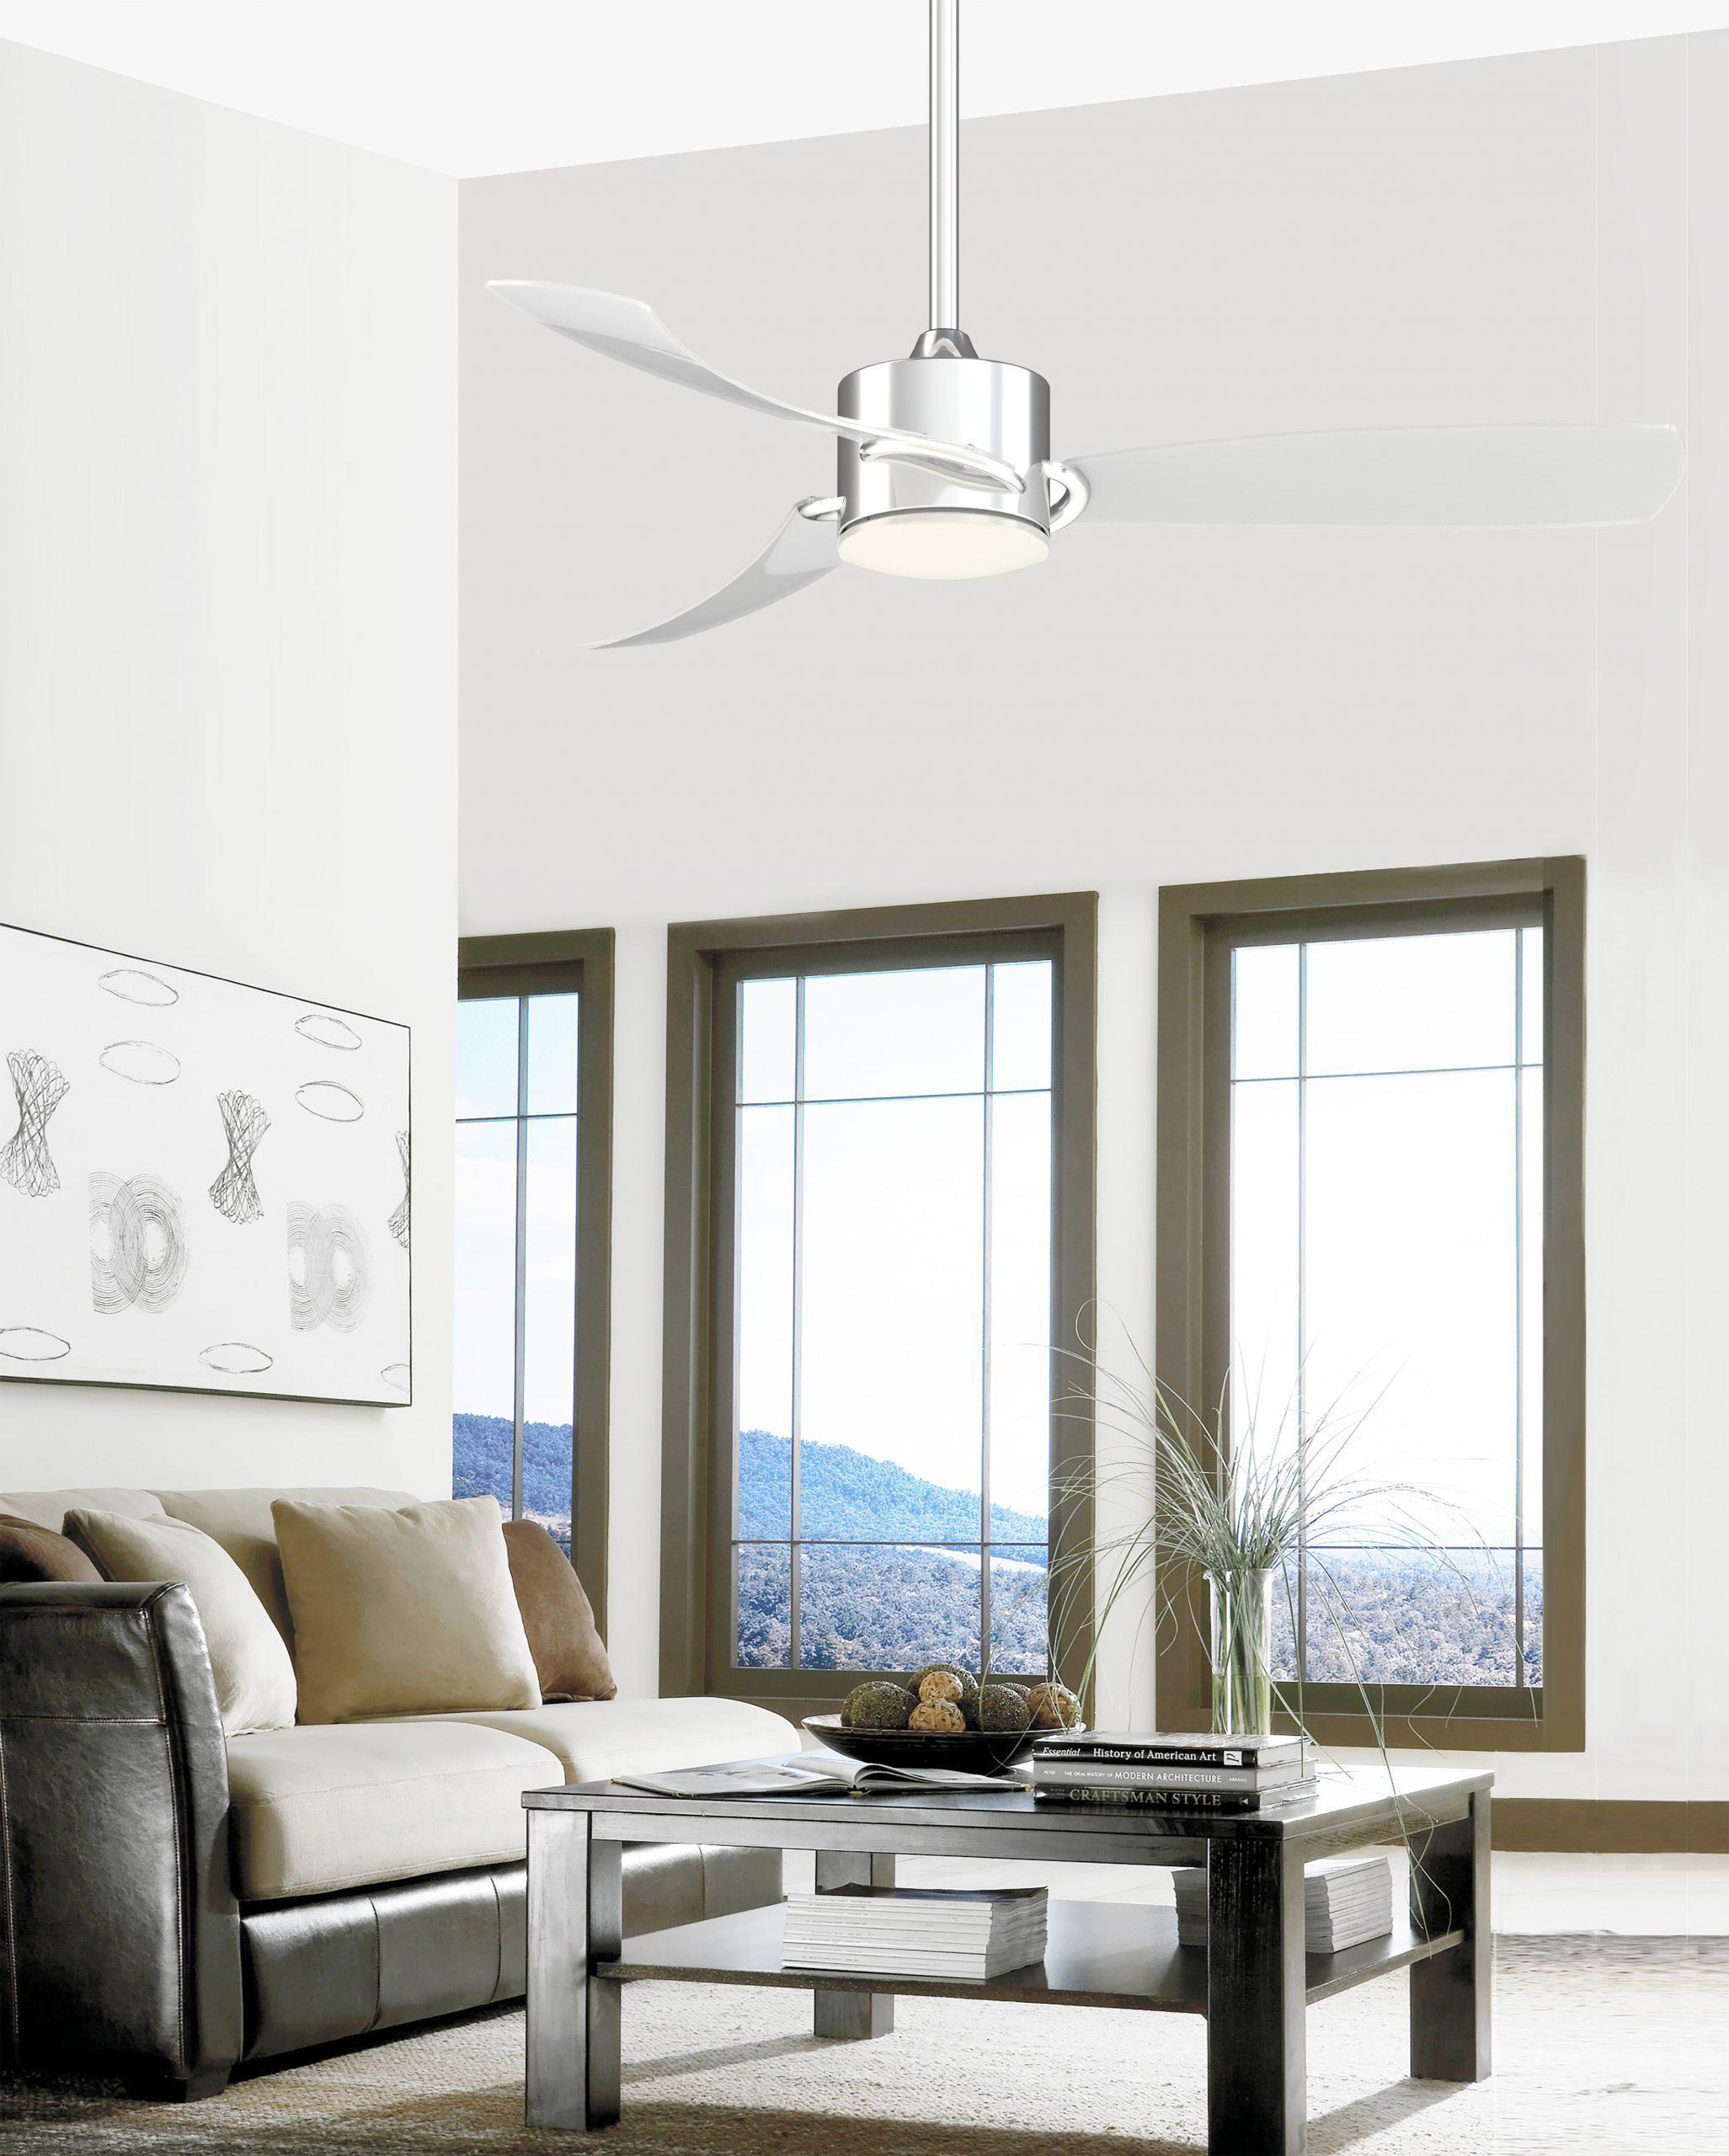 Fanimation SculptAire 52 inch with LED Light Ceiling Fan FP8511 Ceiling Fan Fanimation   